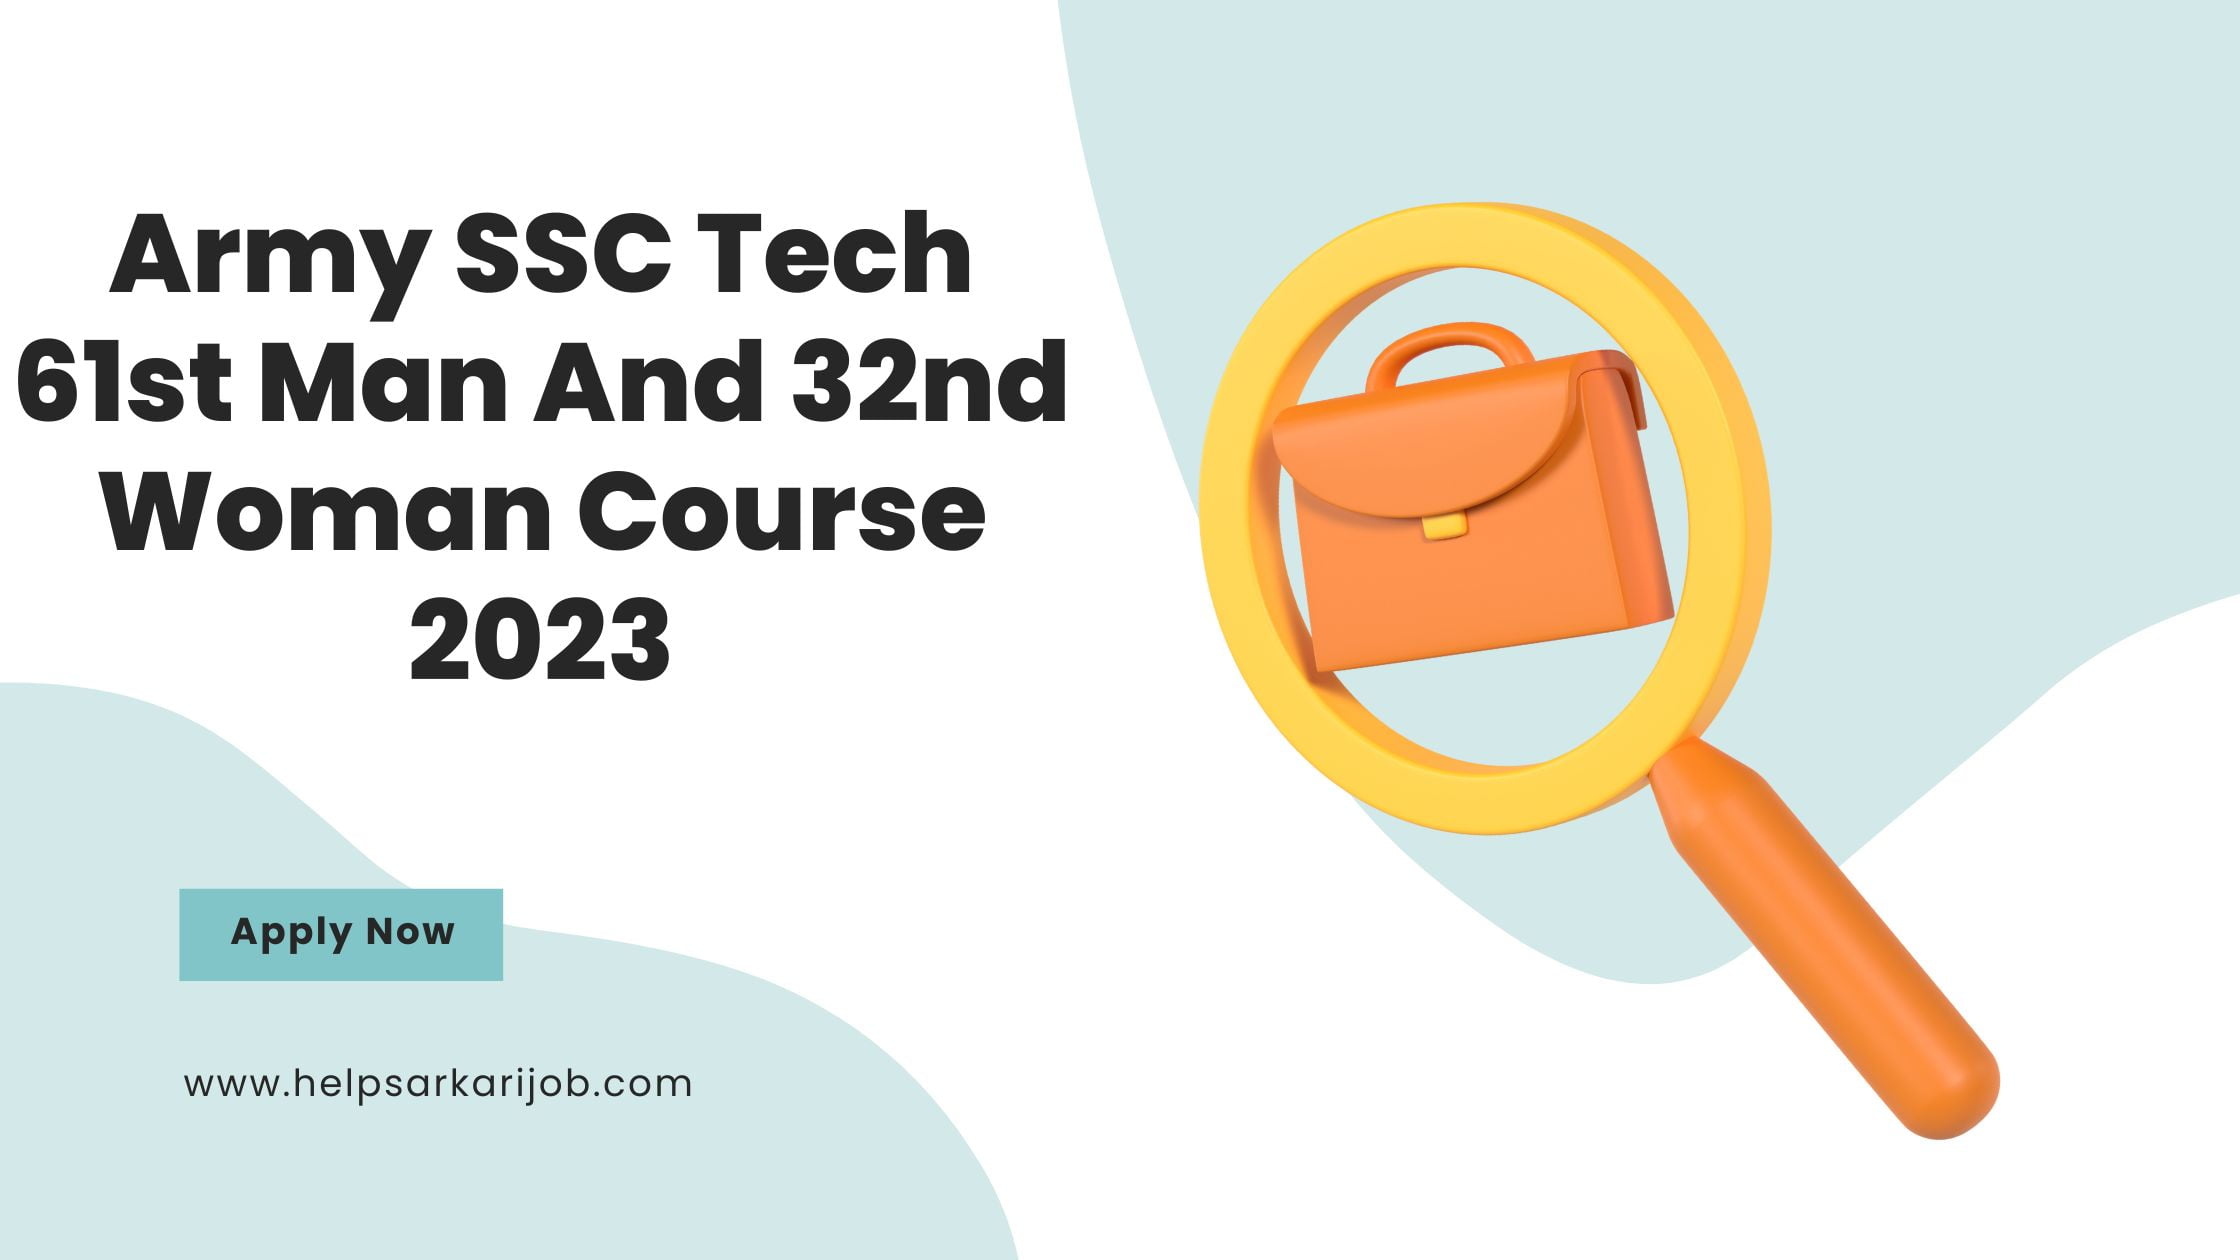 Army SSC Tech 61st Man And 32nd Woman Course 2023